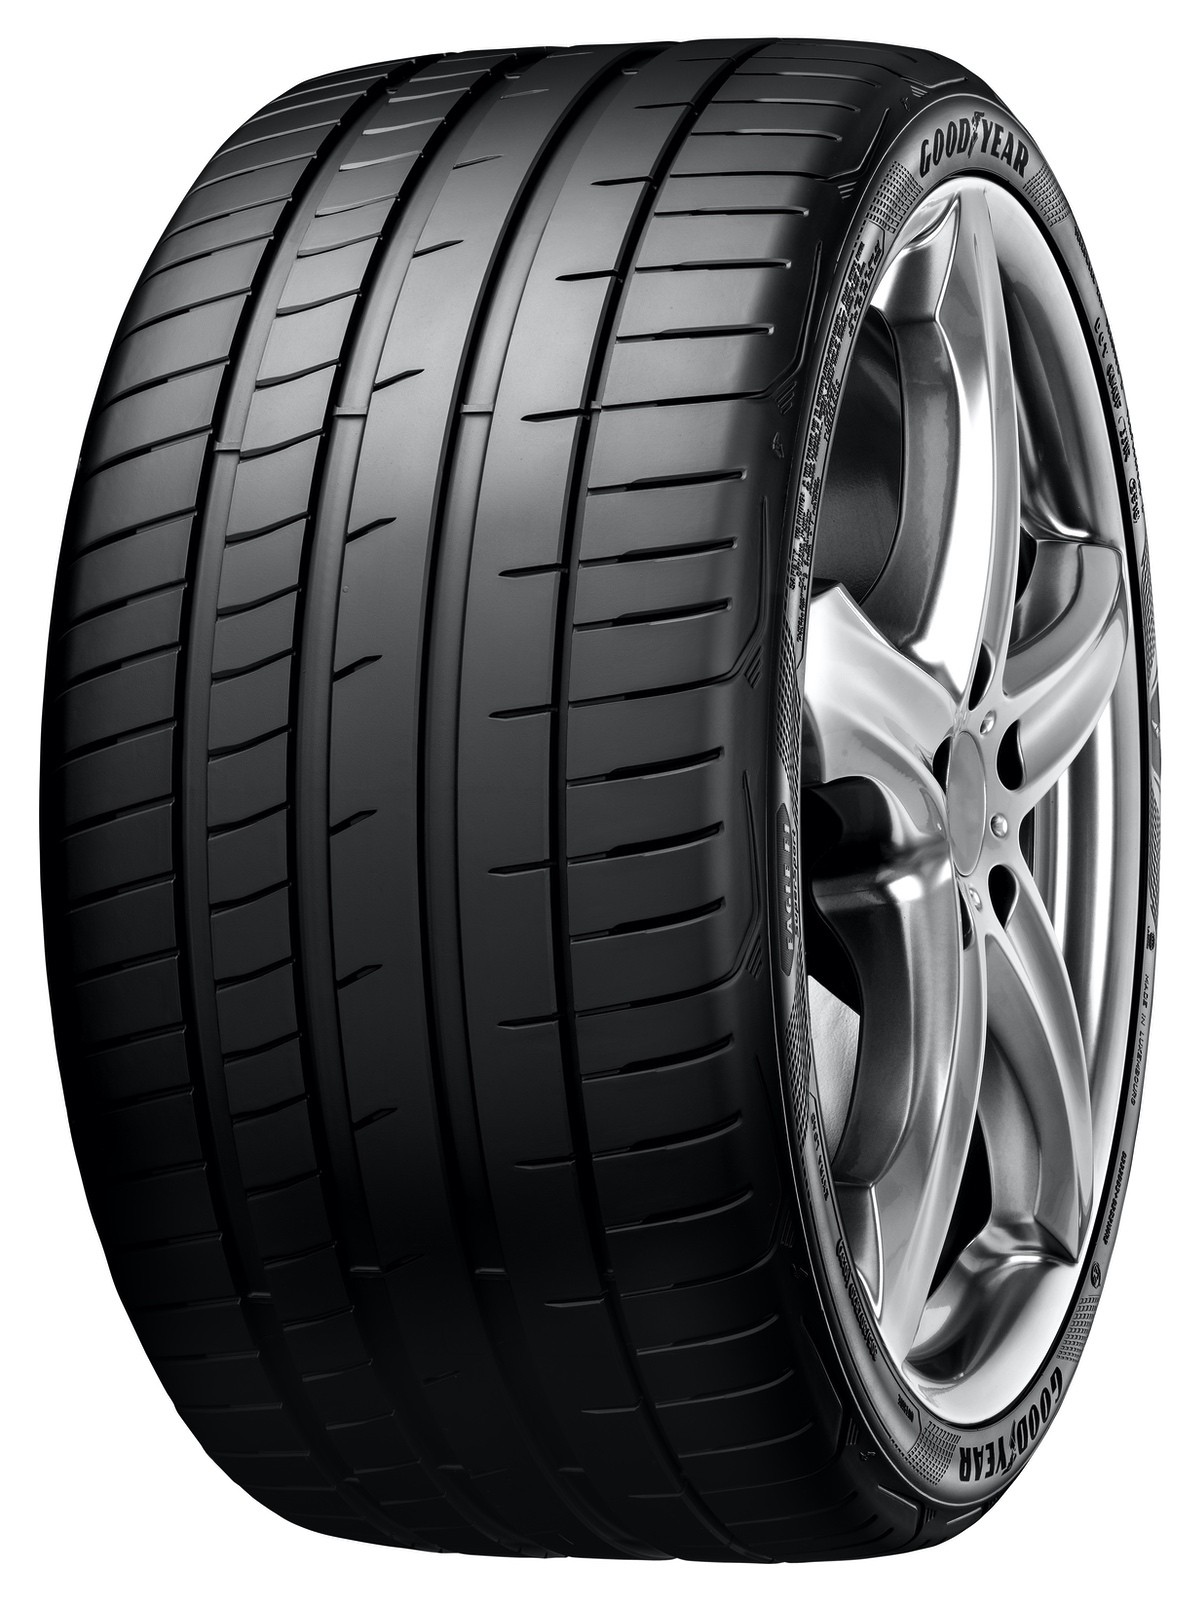 Gomme Nuove Goodyear 245/35 R21 96Y EA F1 SUPERSPORT FP XL pneumatici nuovi Estivo